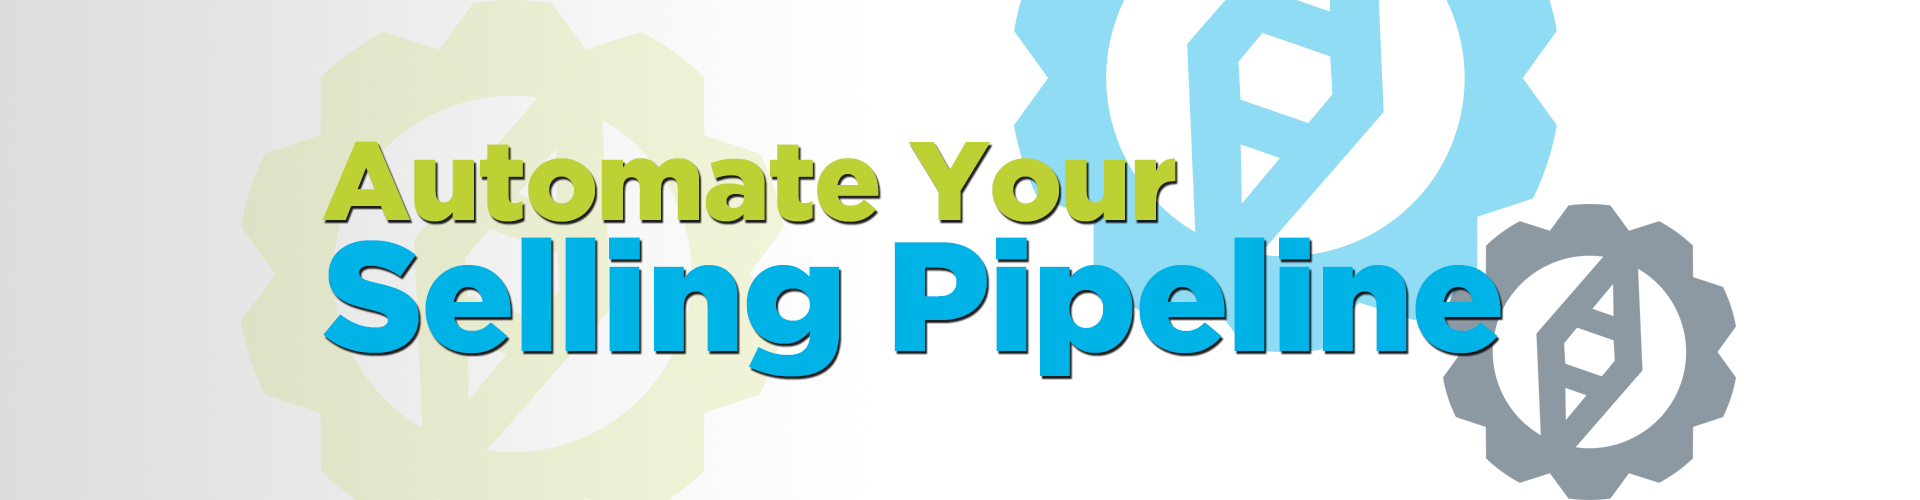 Automate Your Selling Pipeline